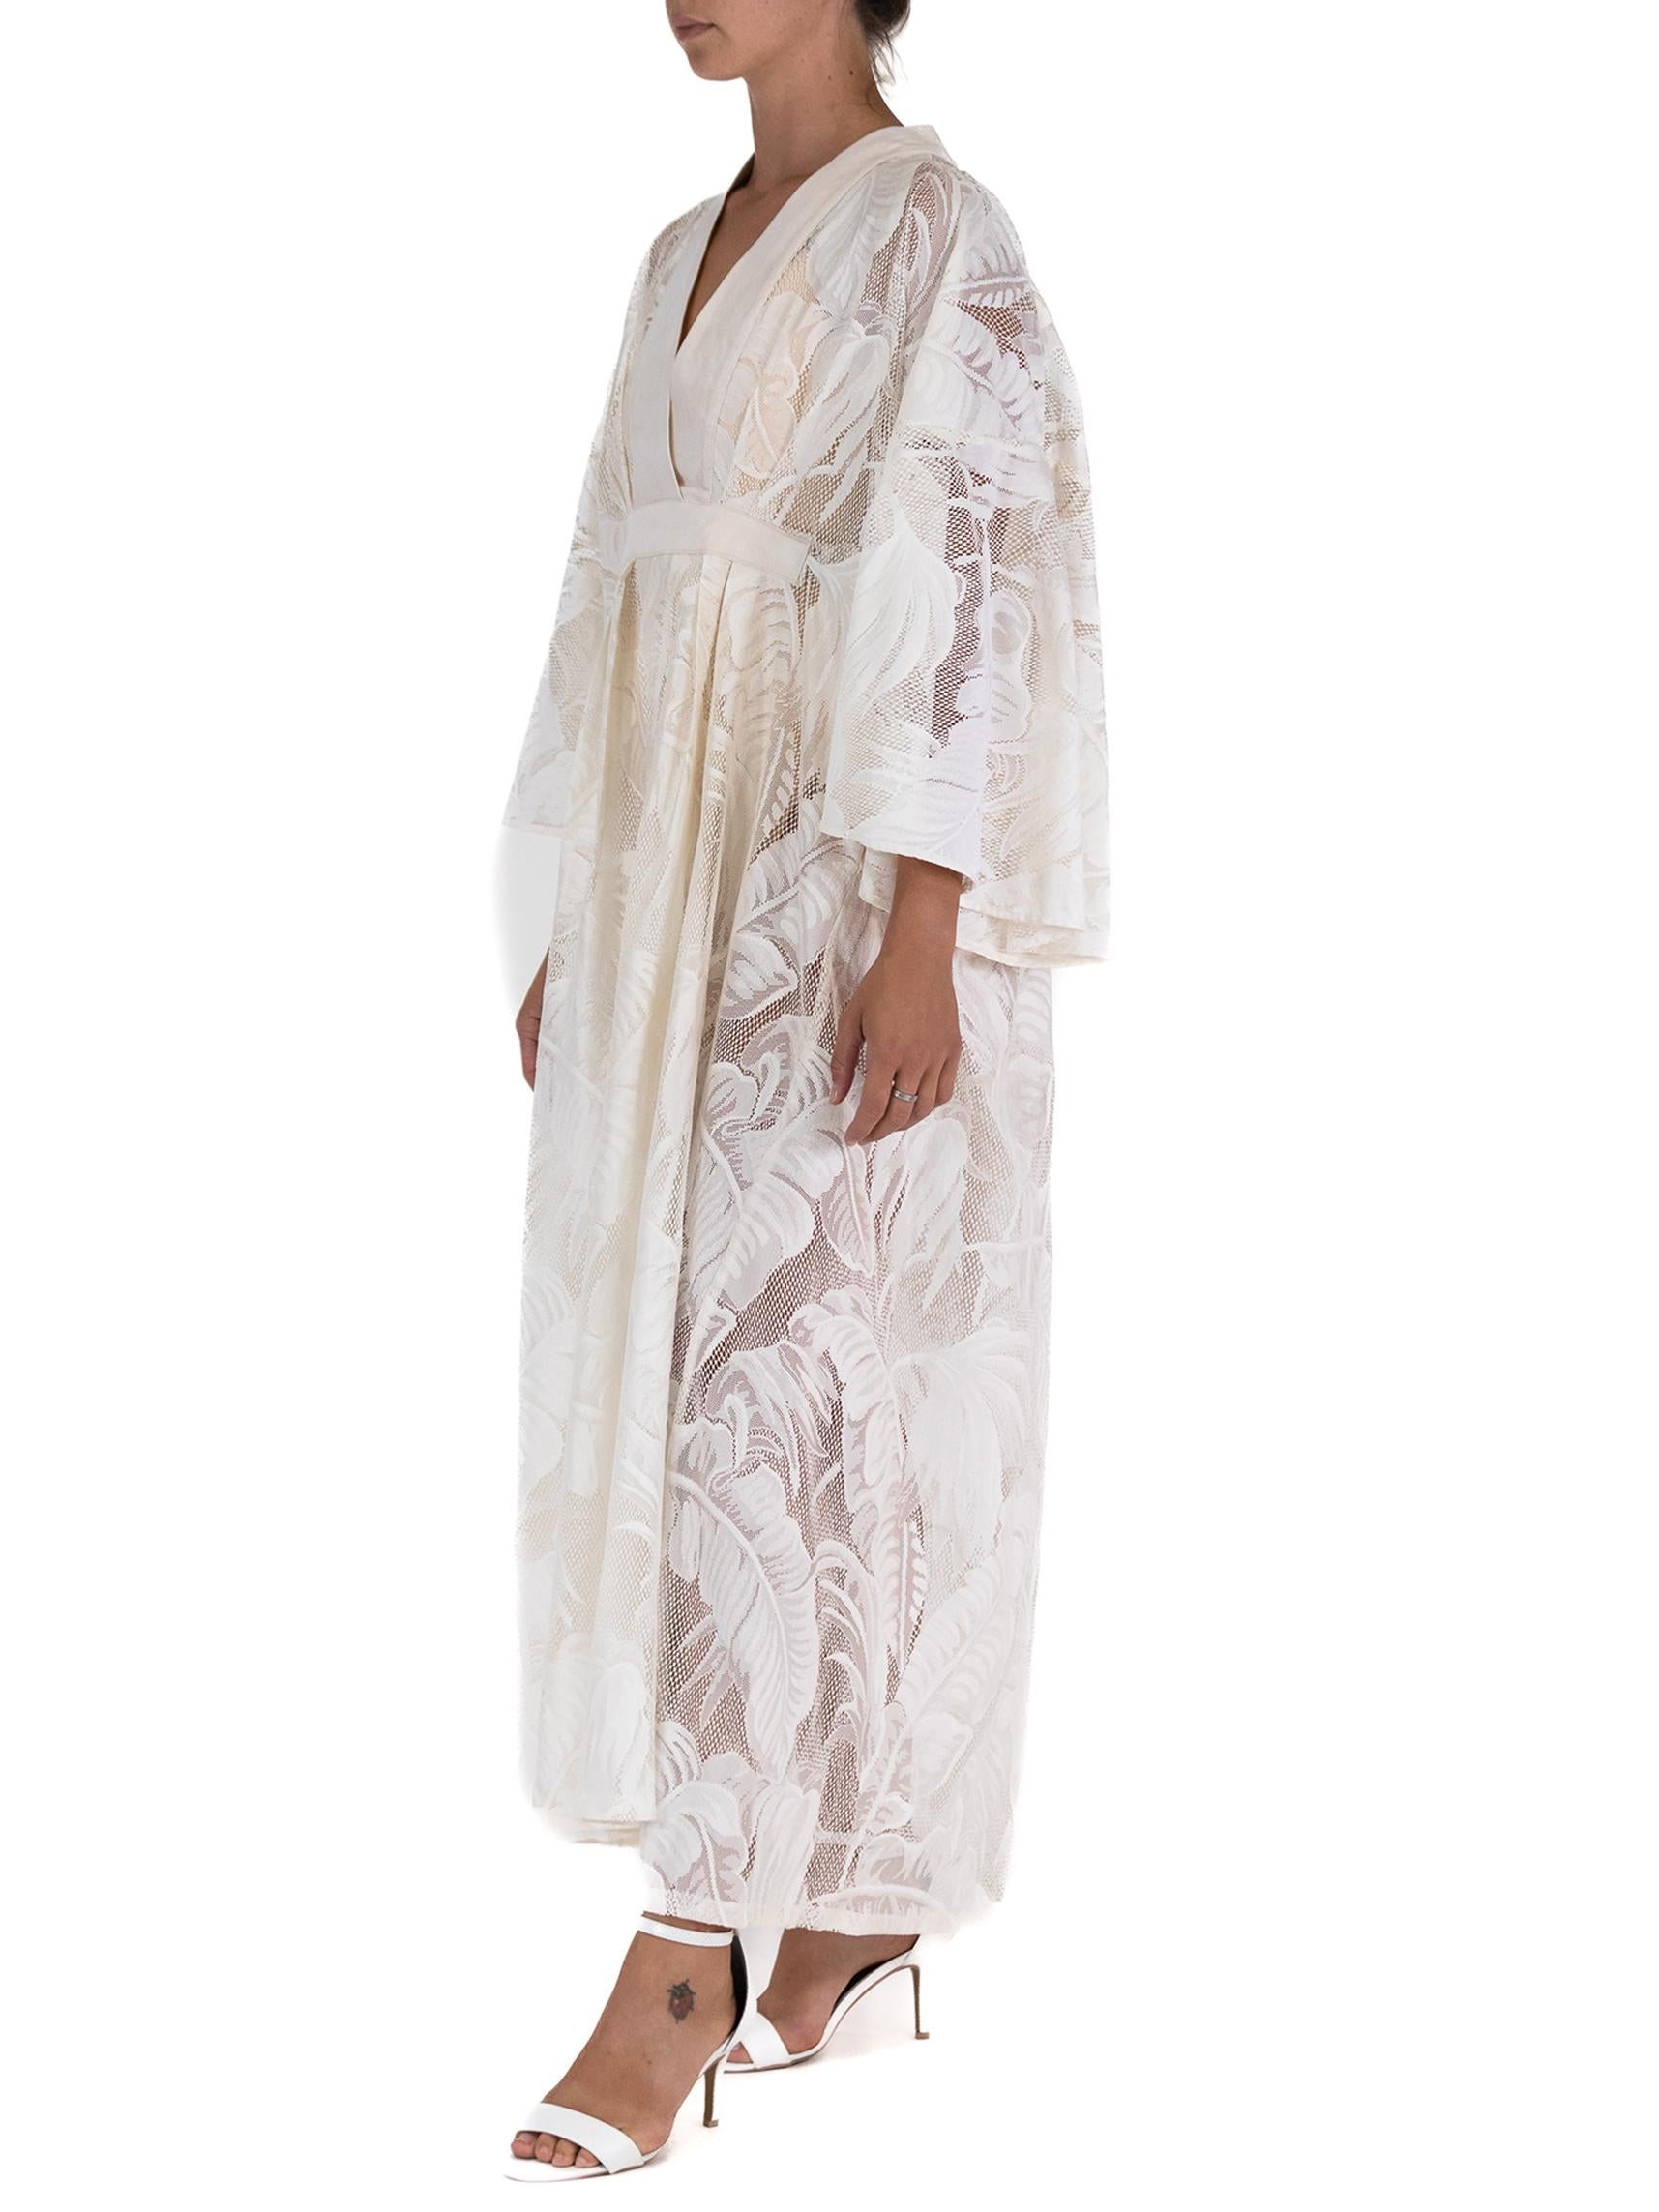 MORPHEW COLLECTION White Poly/Nylon Banana Leaf Lace Kaftan In Excellent Condition For Sale In New York, NY